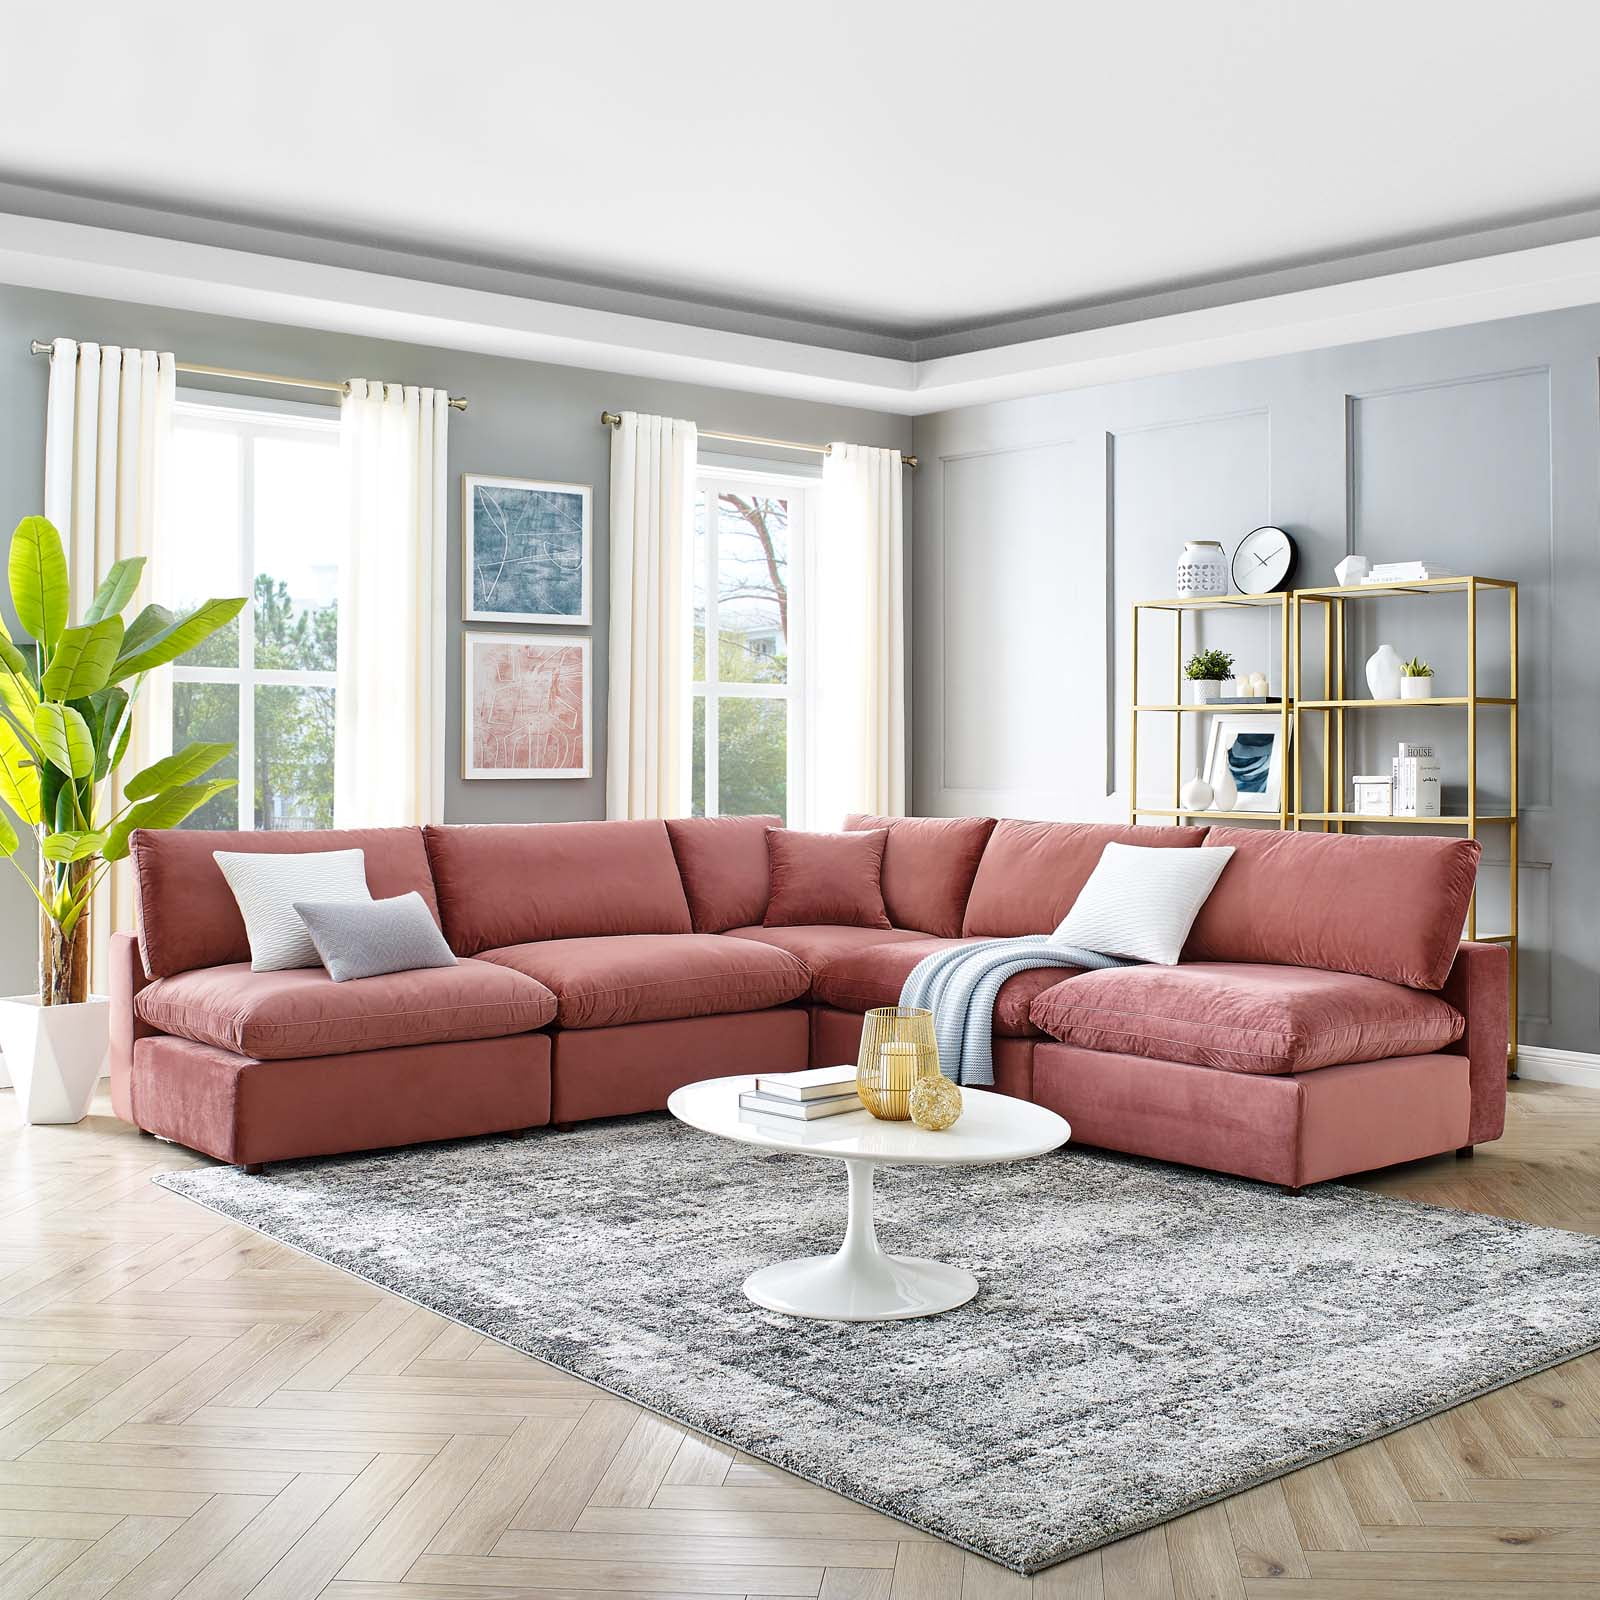 Piece Sectional Sofa In Dusty Rose